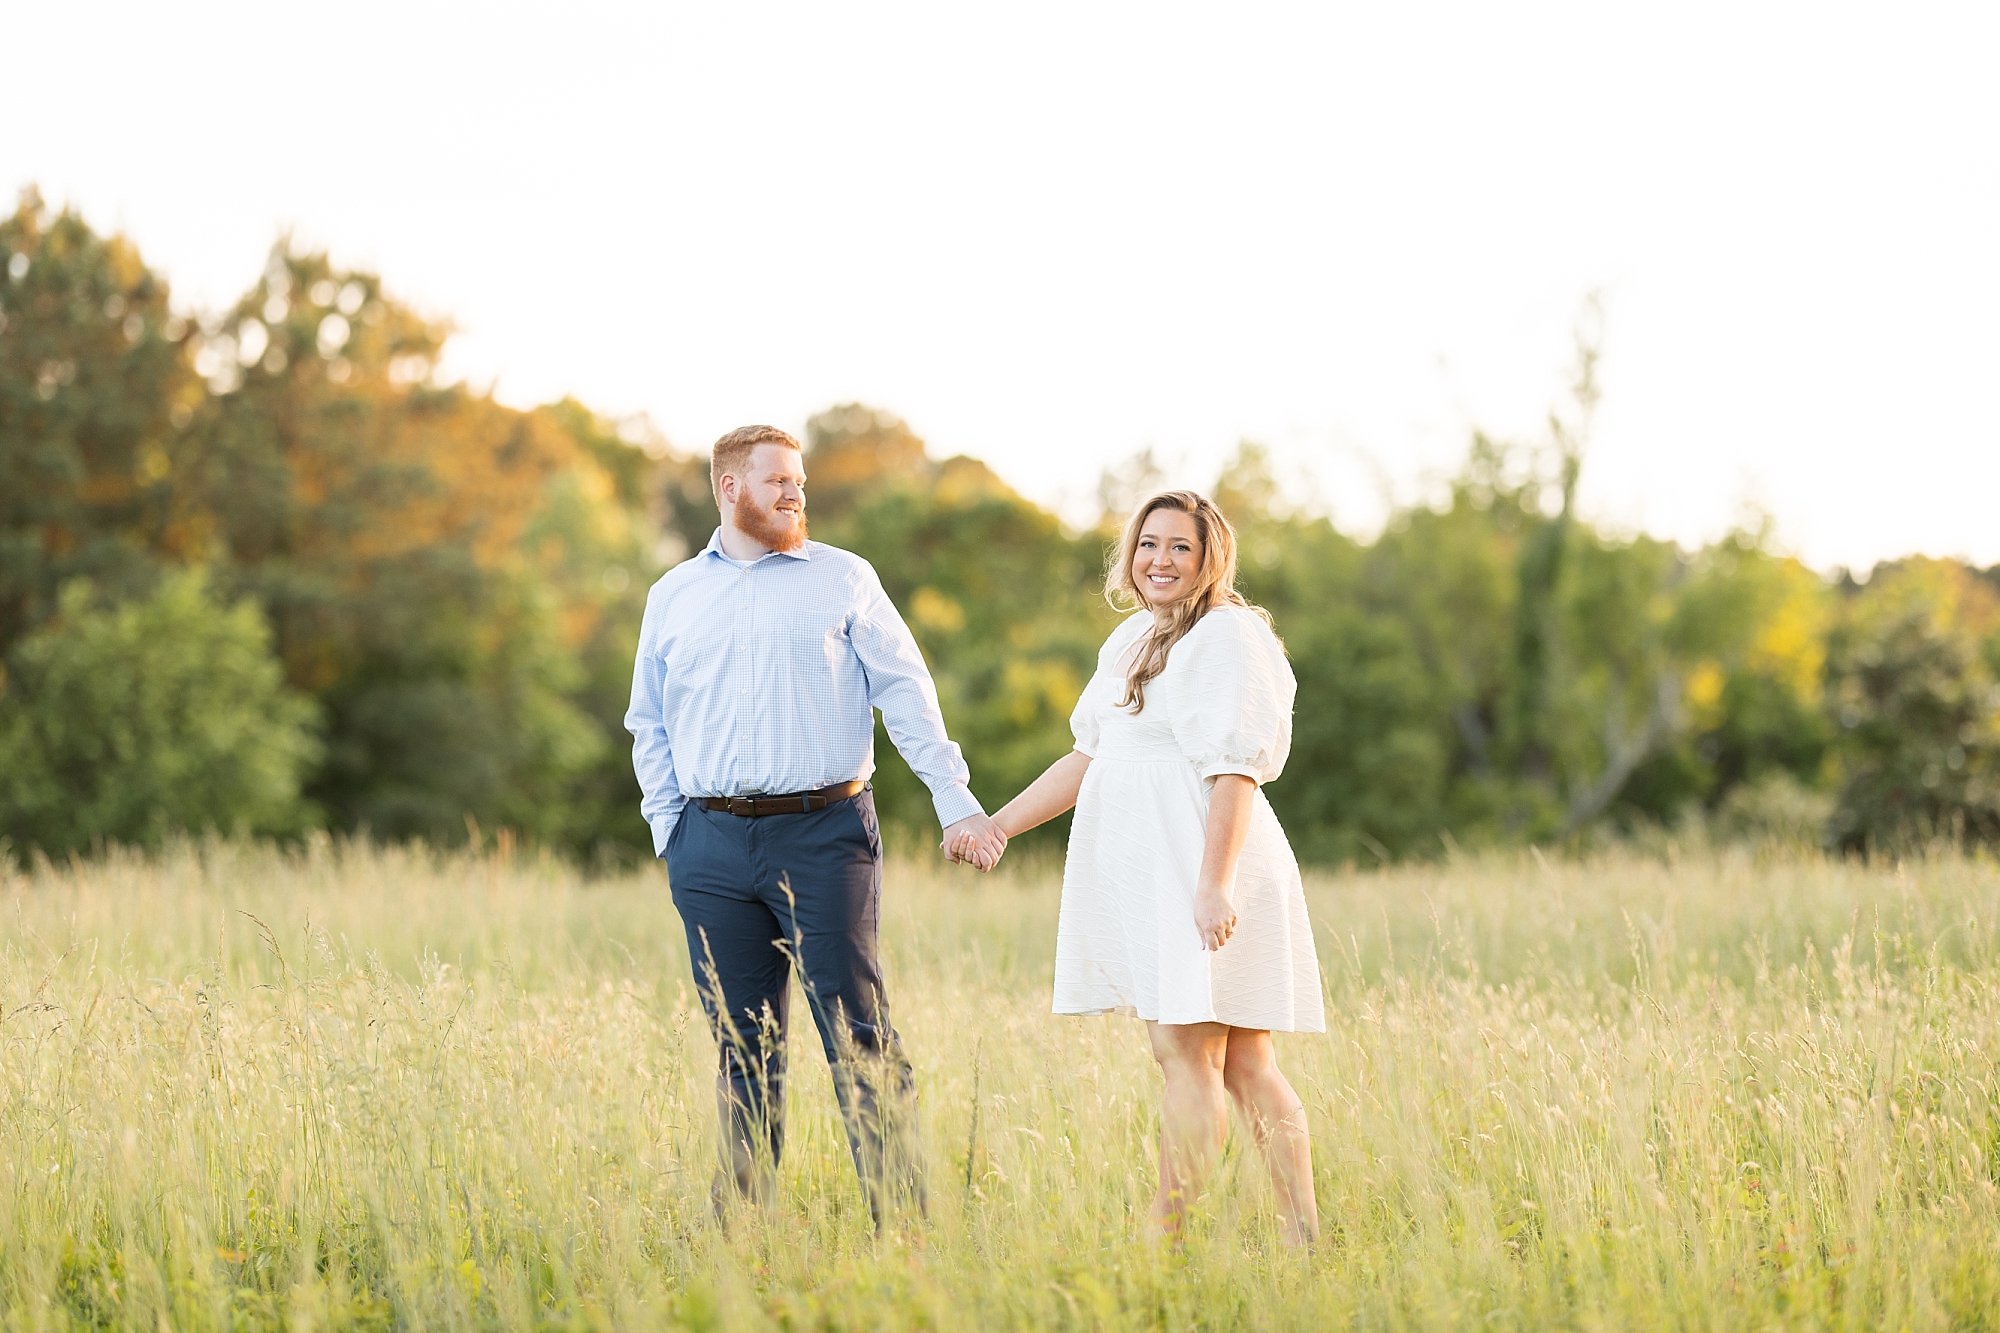 Free people white dress in a field for engagement photos | Raleigh NC Engagement Photographer